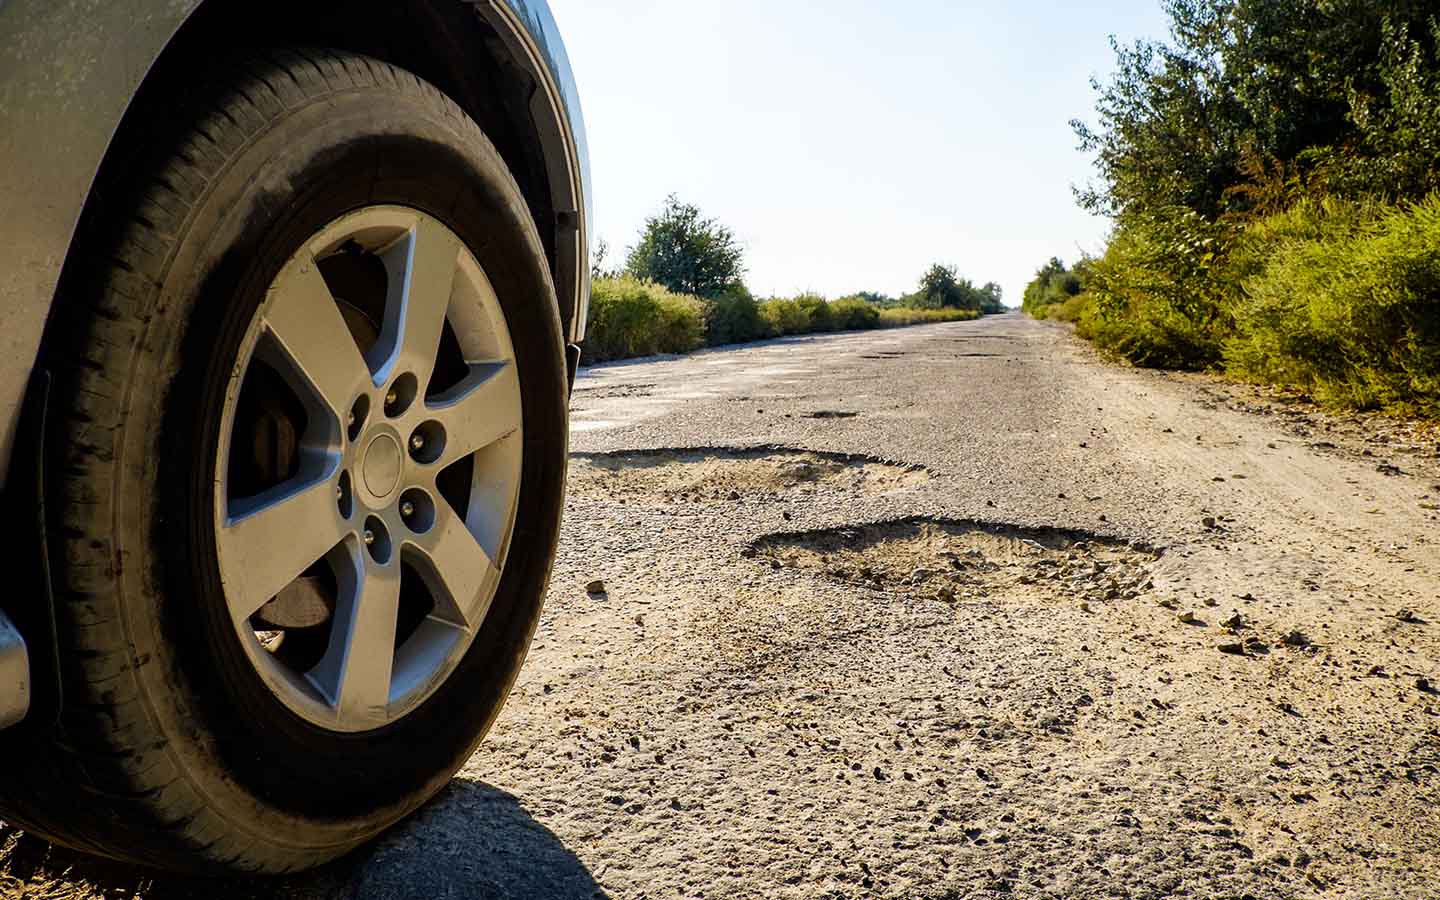 for Reducing vehicle suspension bounce , avoid driving on potholes